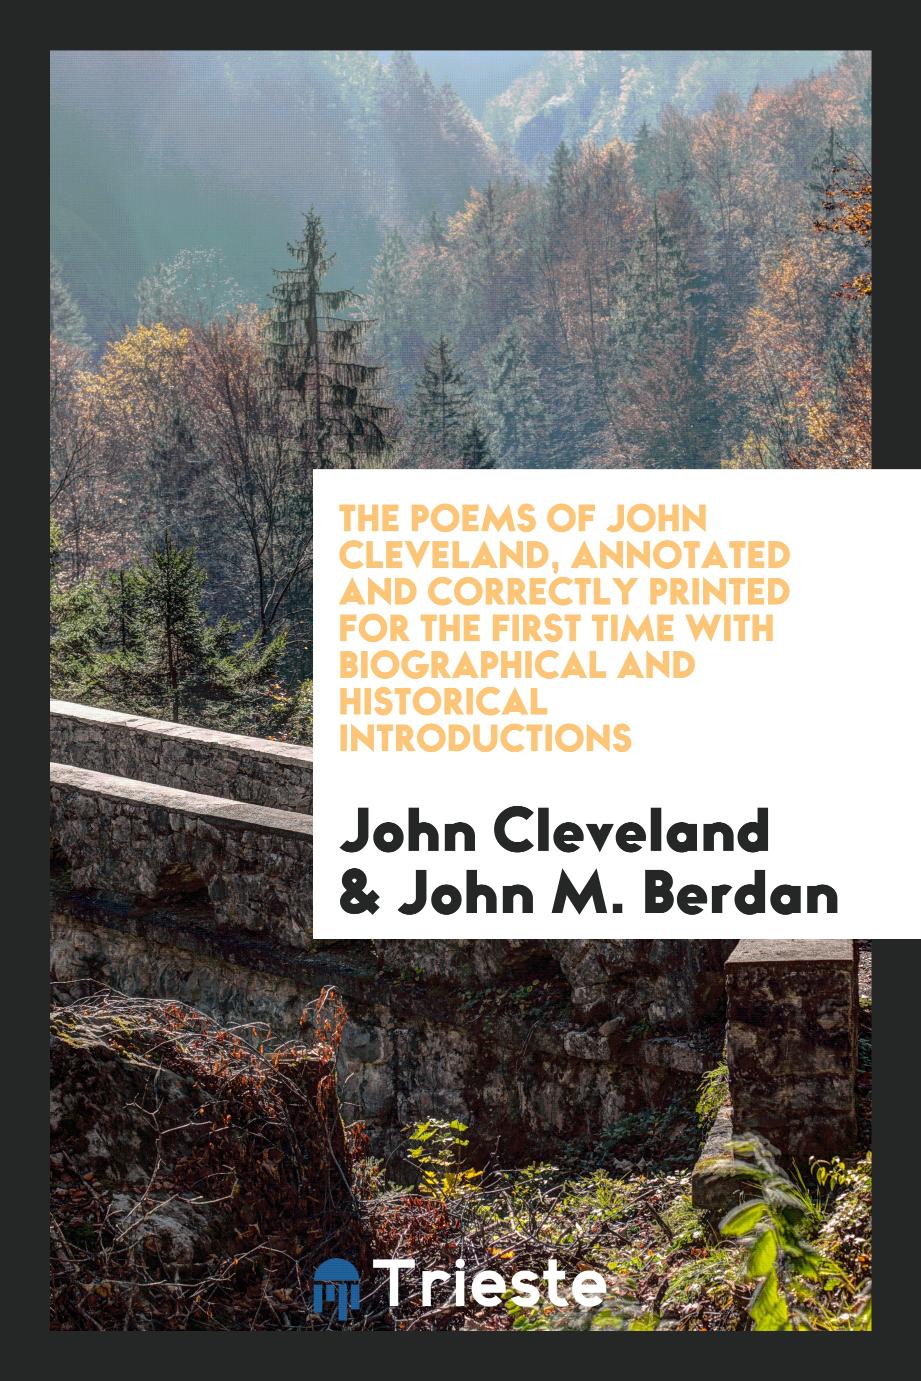 The Poems of John Cleveland, annotated and correctly printed for the first time with biographical and historical introductions